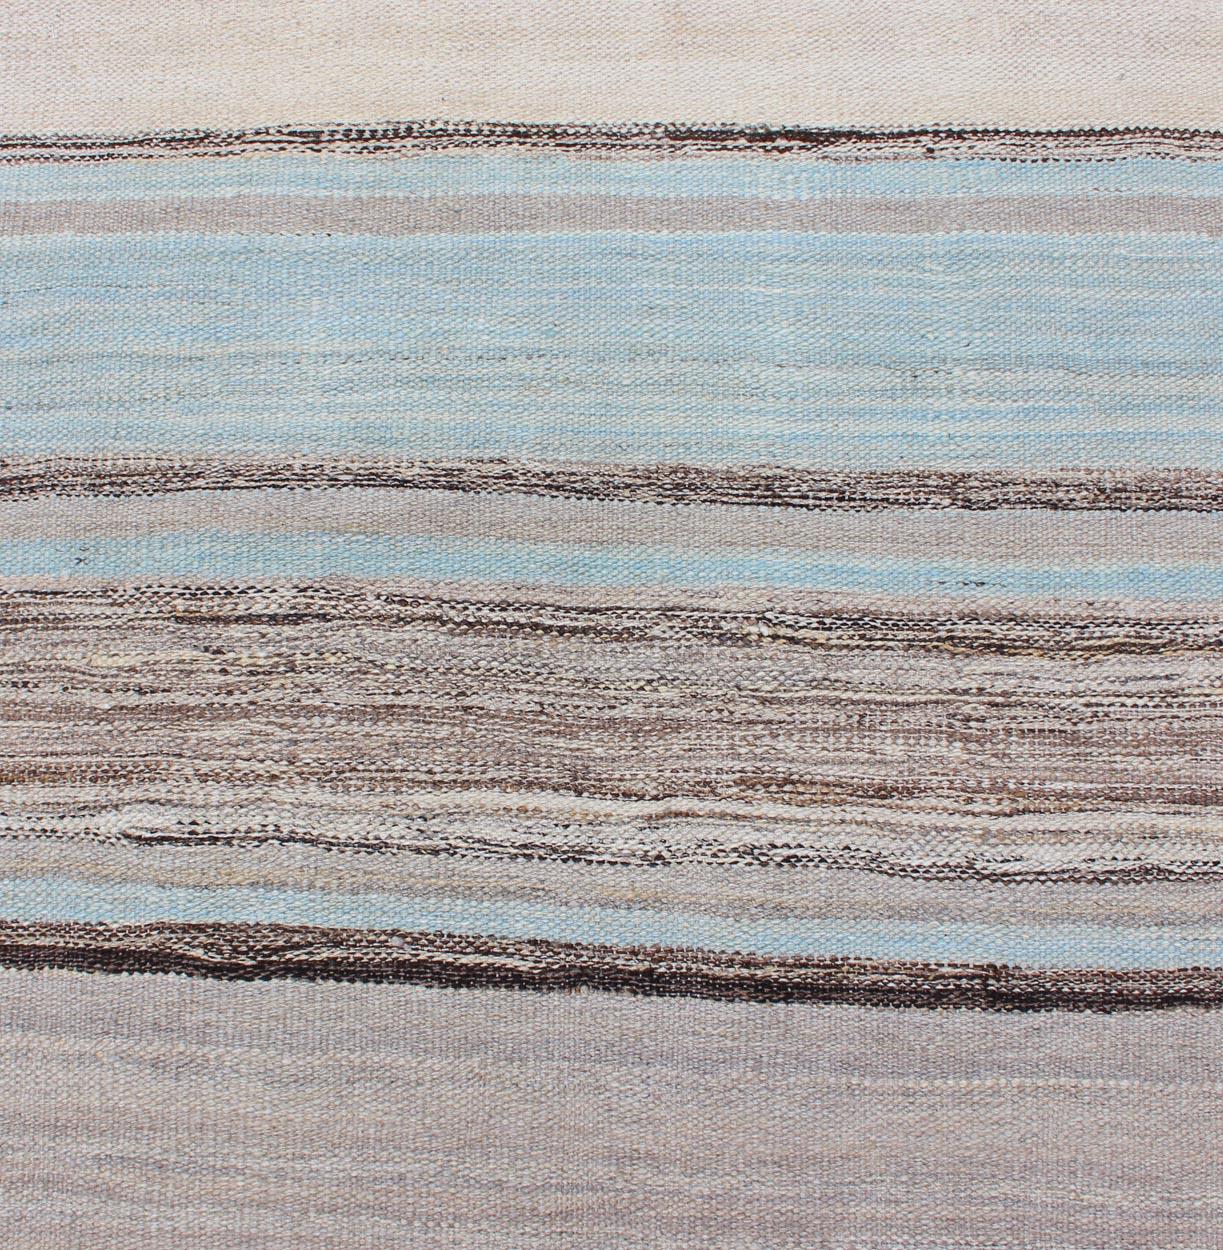 Wool Modern Kilim Rug with Stripes in Shades of Blue, Taupe, Brown, and Cream Runner For Sale